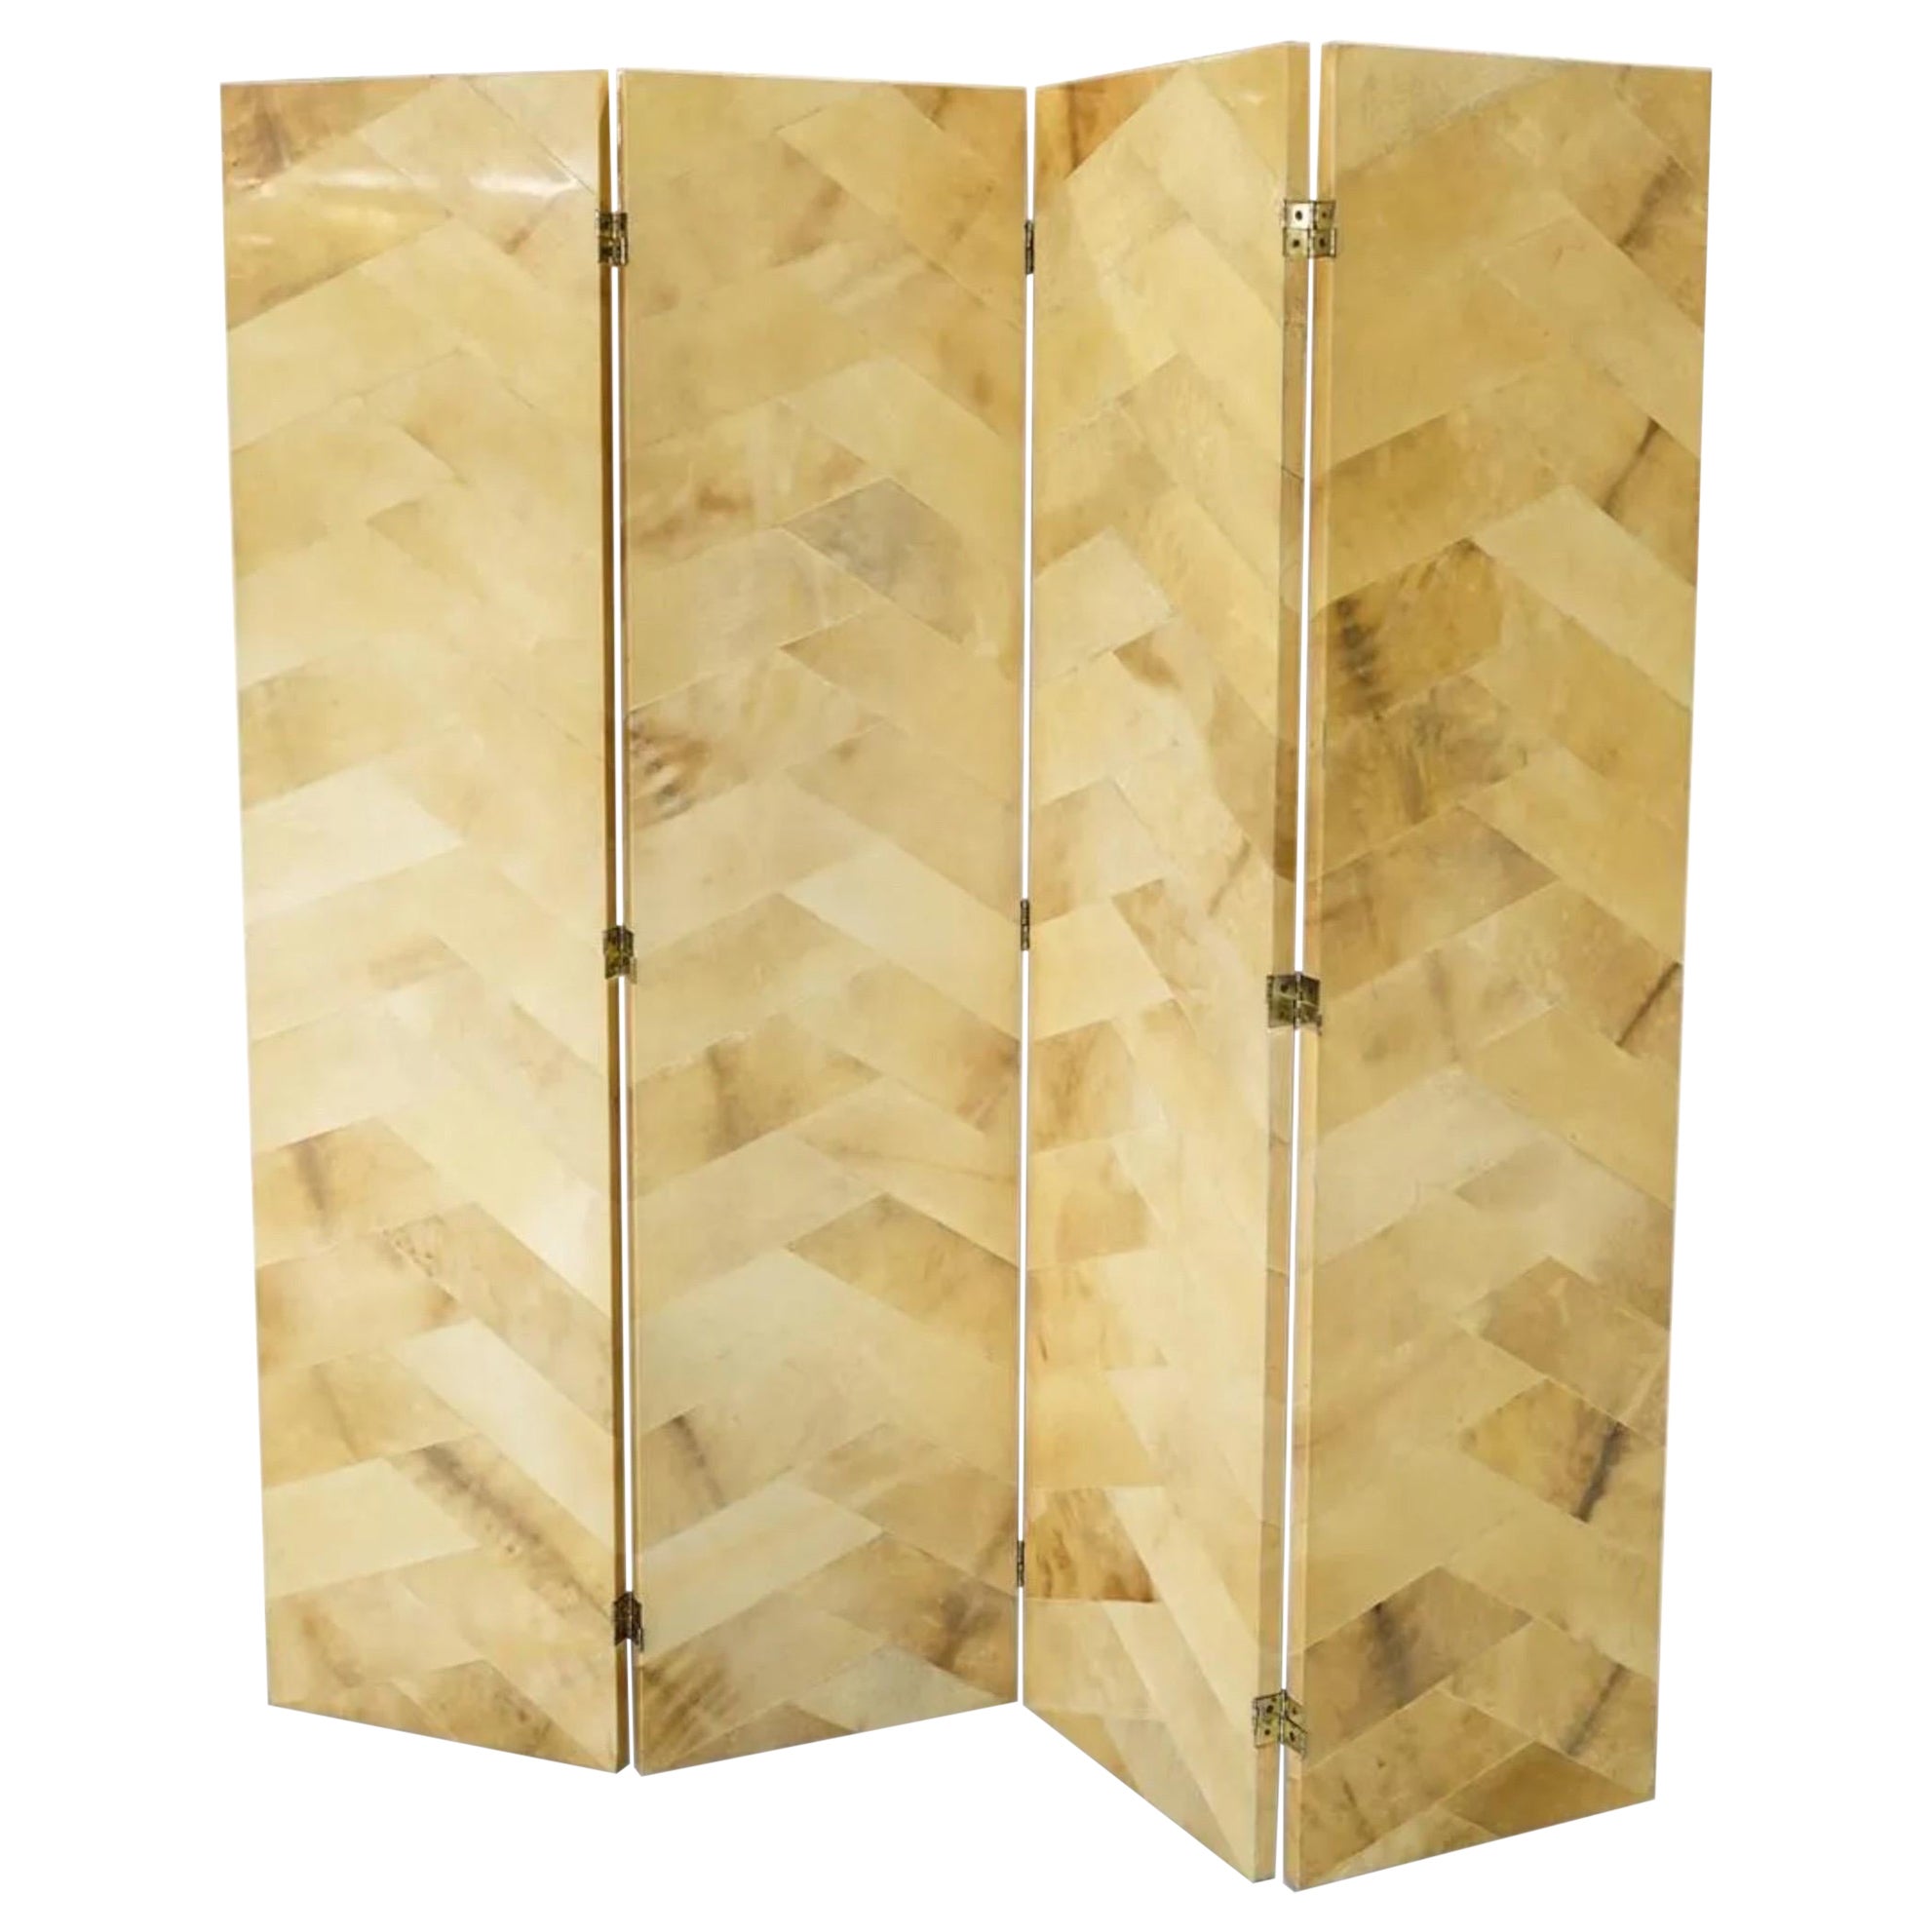 Ron Seff Goatskin Lacquered Screen or Room Divider